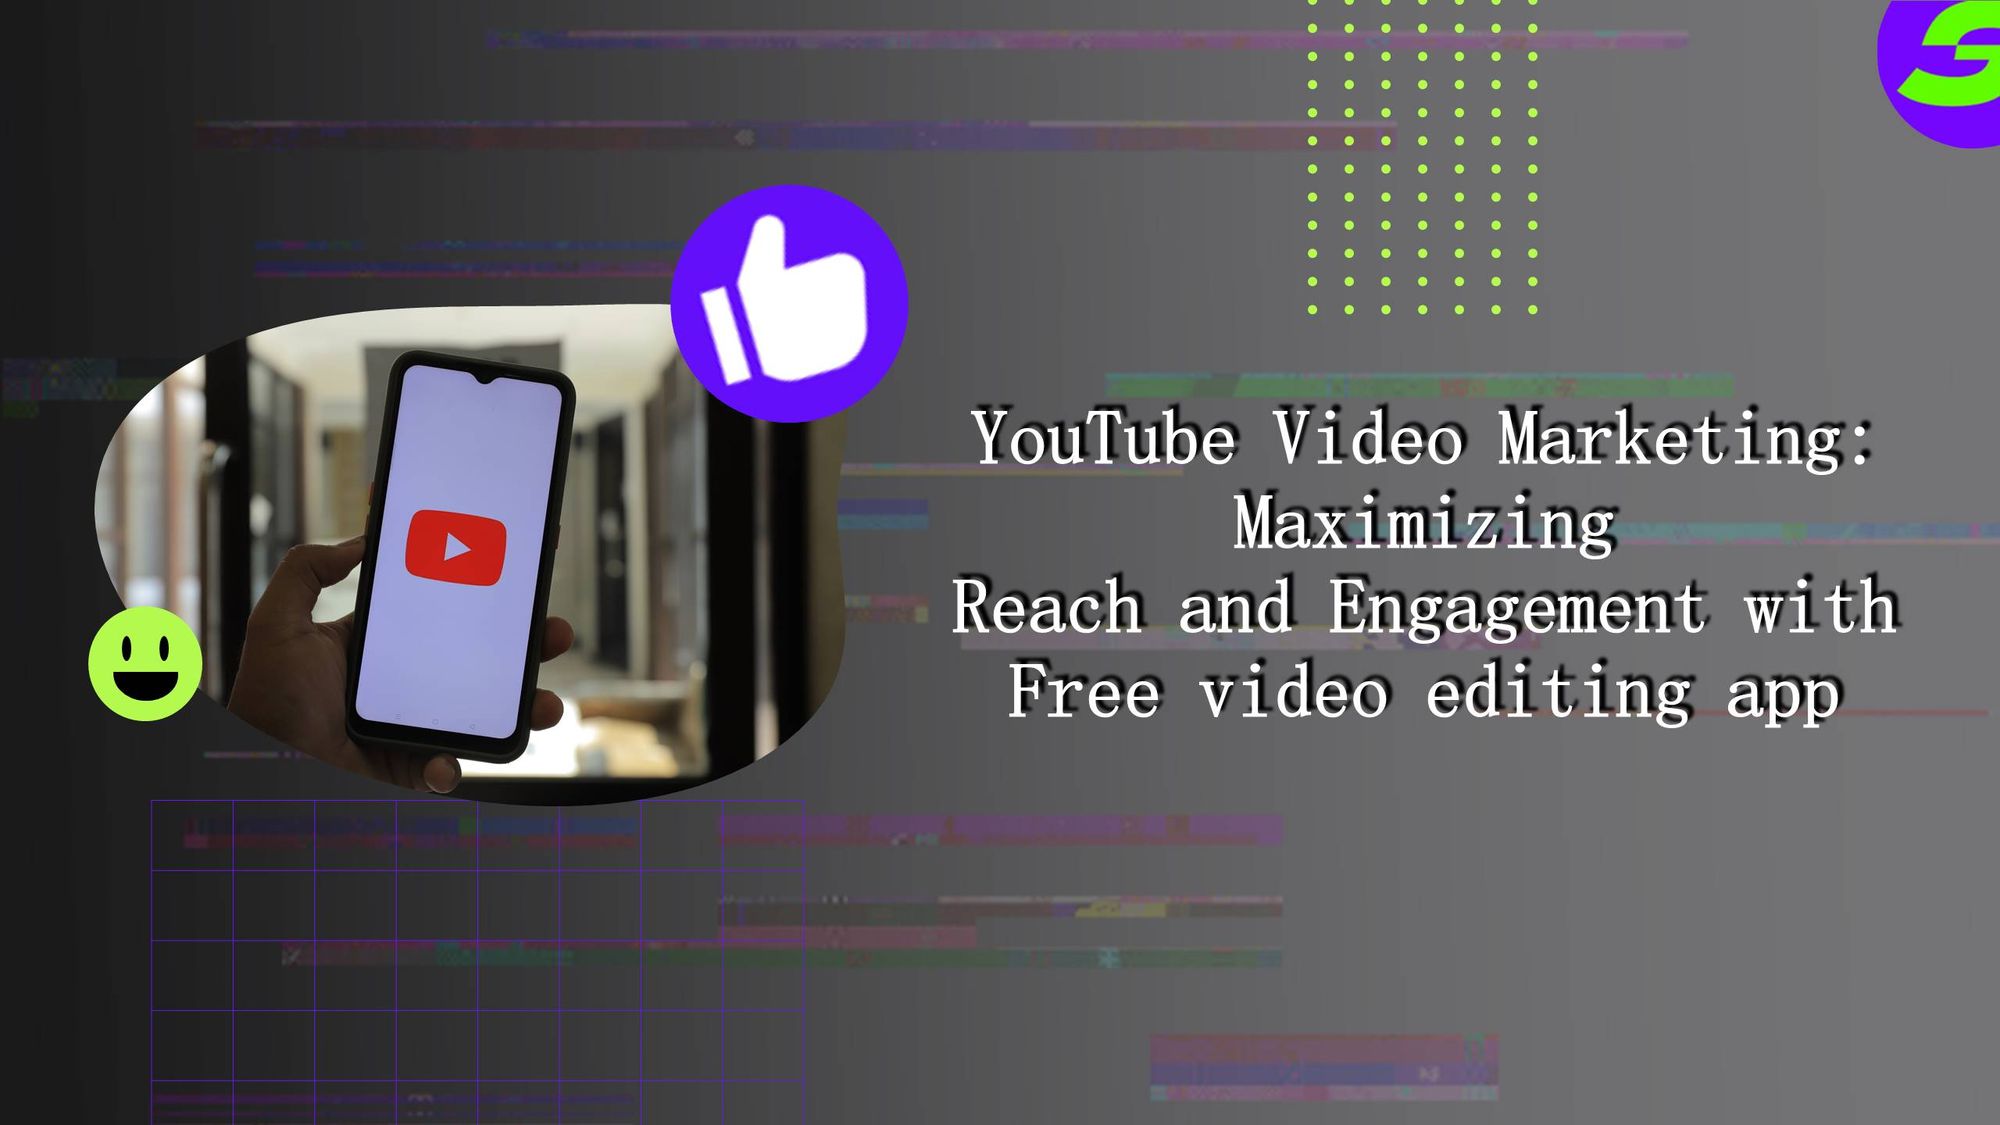 Unleash the potential of YouTube Video Marketing with the free video editor.